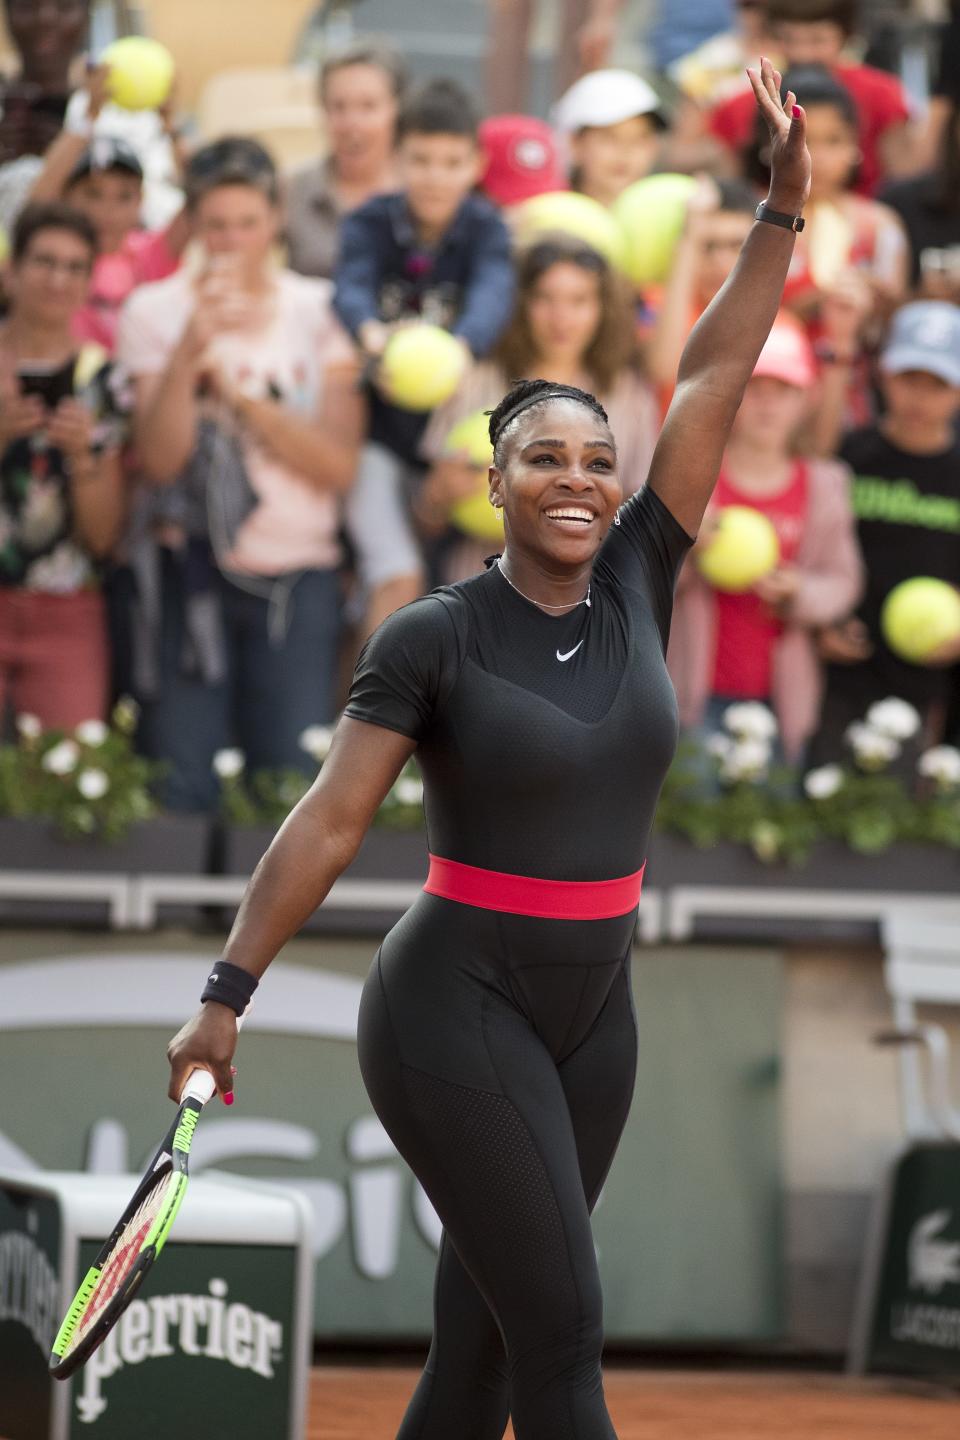 The Women’s Tennis Association released a summary of its rule changes for 2019, allowing for compression clothing like Serena Williams' French Open catsuit.